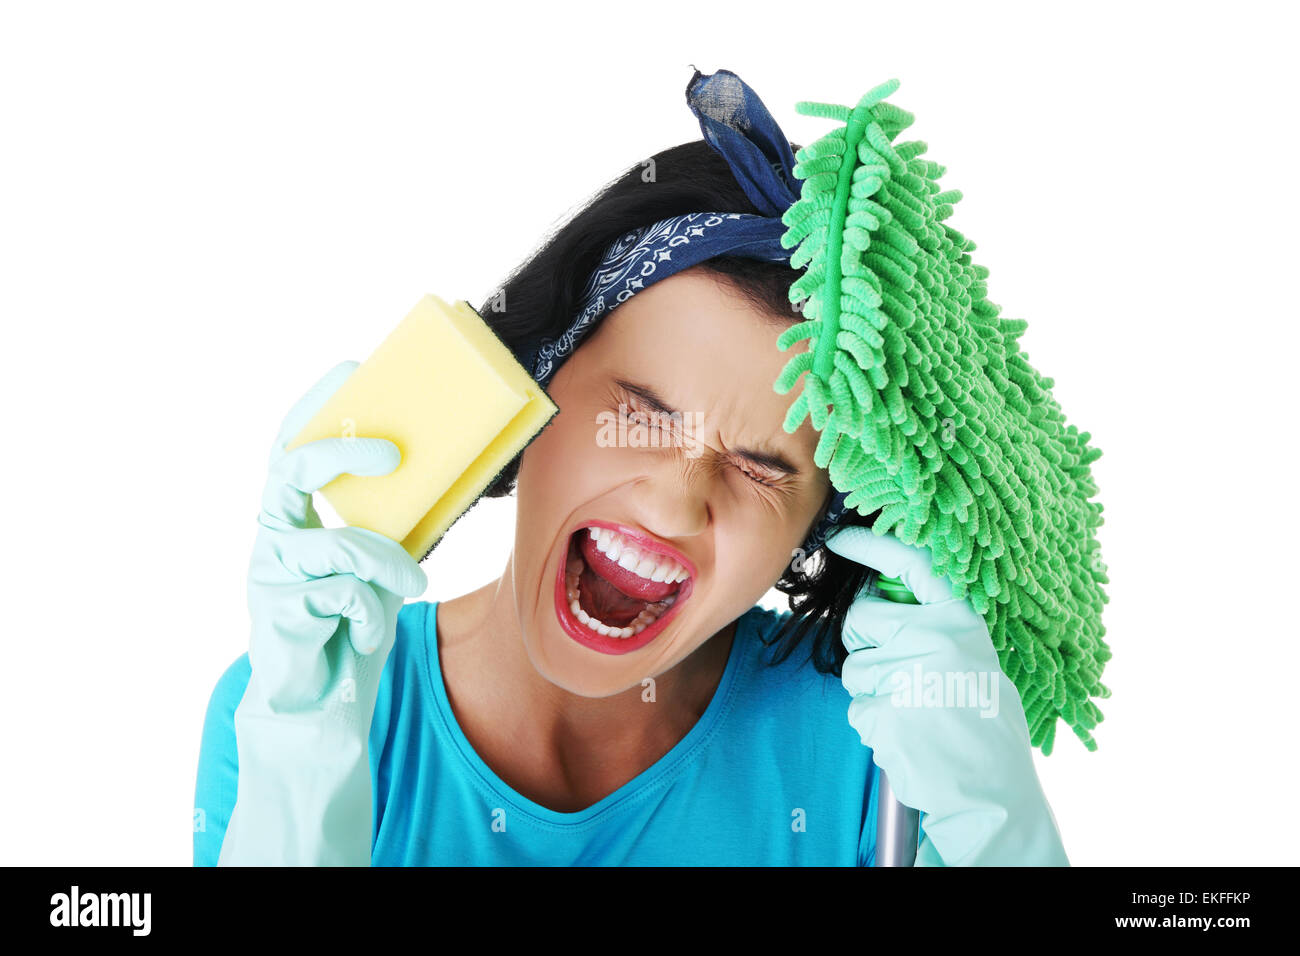 Tired frustrated and exhausted cleaning woman Stock Photo